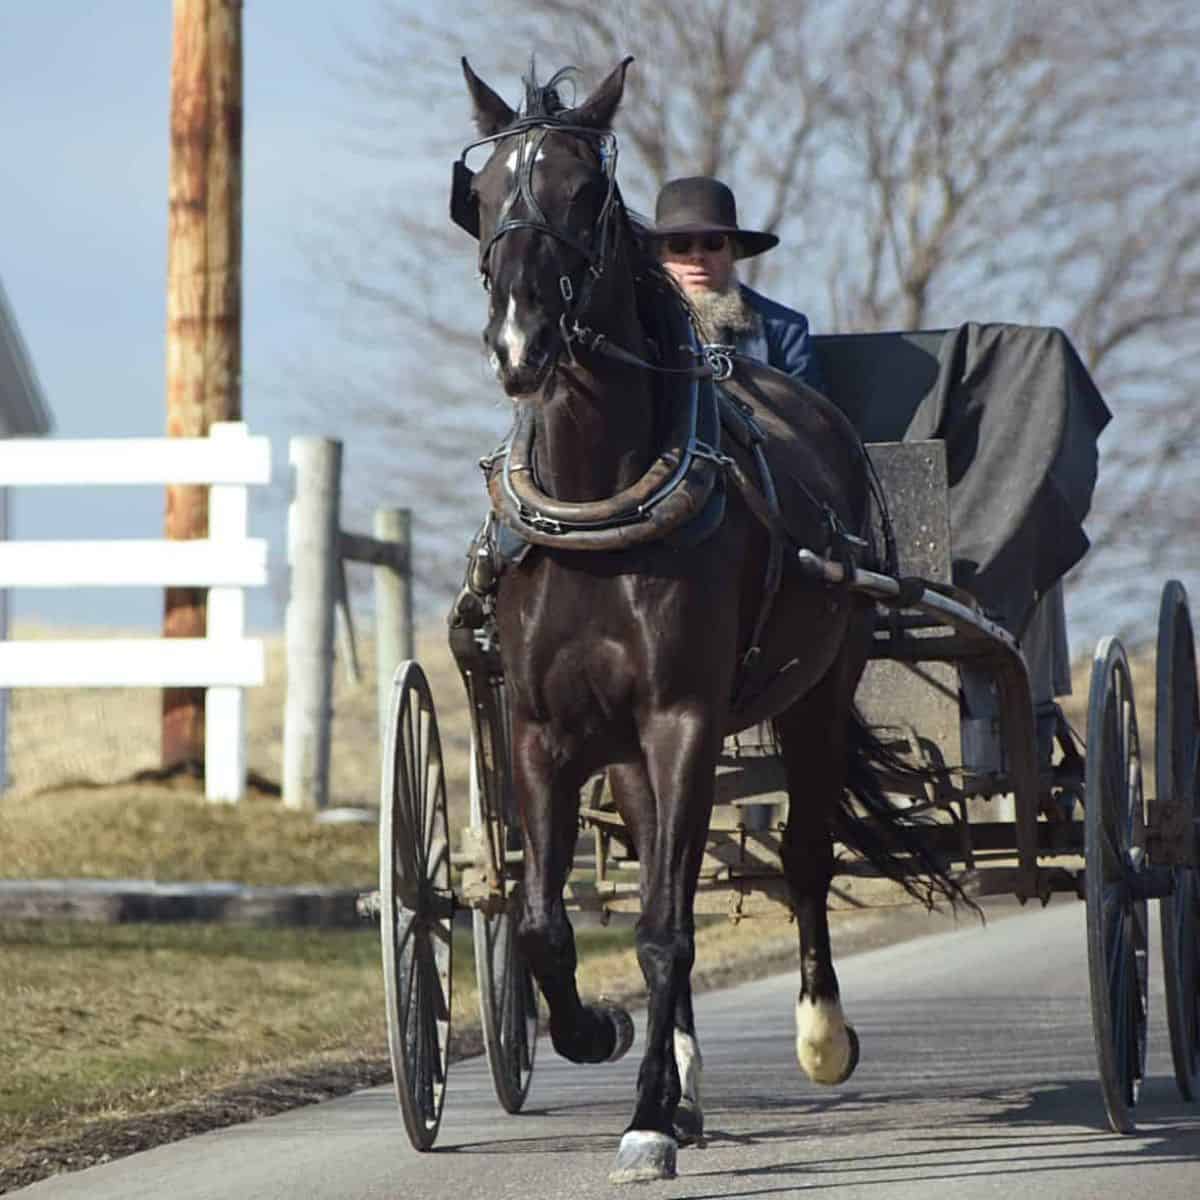 Amish man riding in an open buggy.